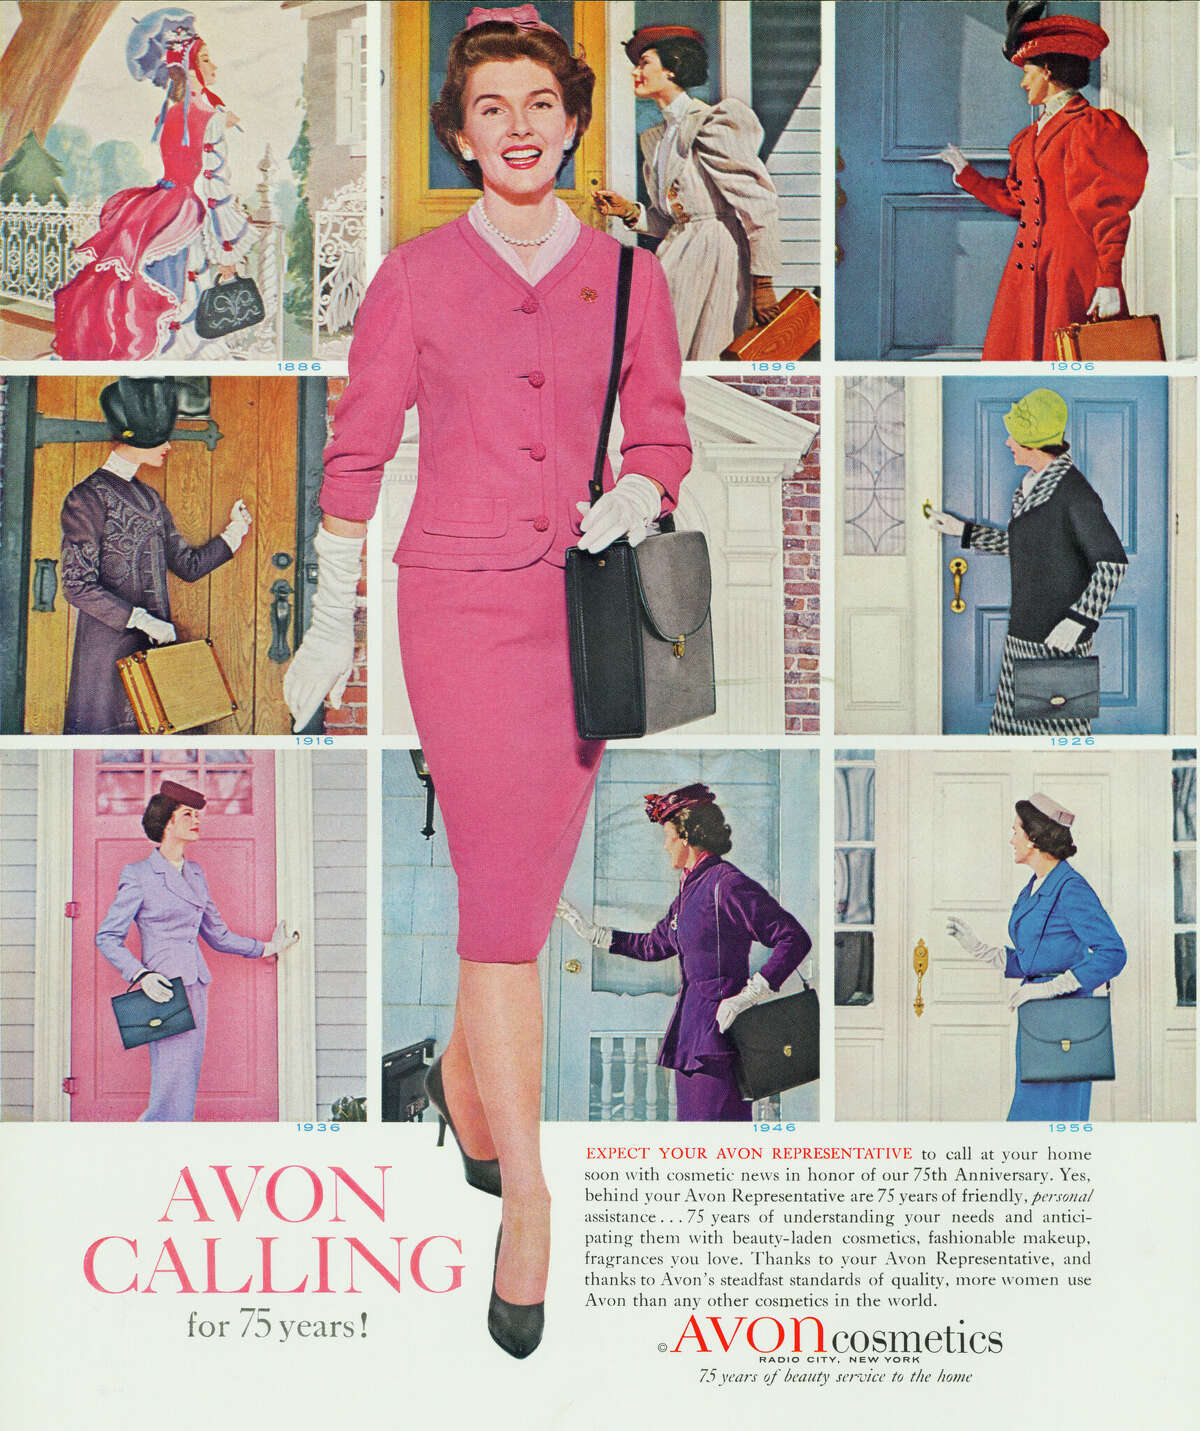 A 1961 advertisement from Avon's 75th year shows the different generations of sales representatives. The popular catchphrase "Ding-dong, Avon calling" originated in the 1950s.